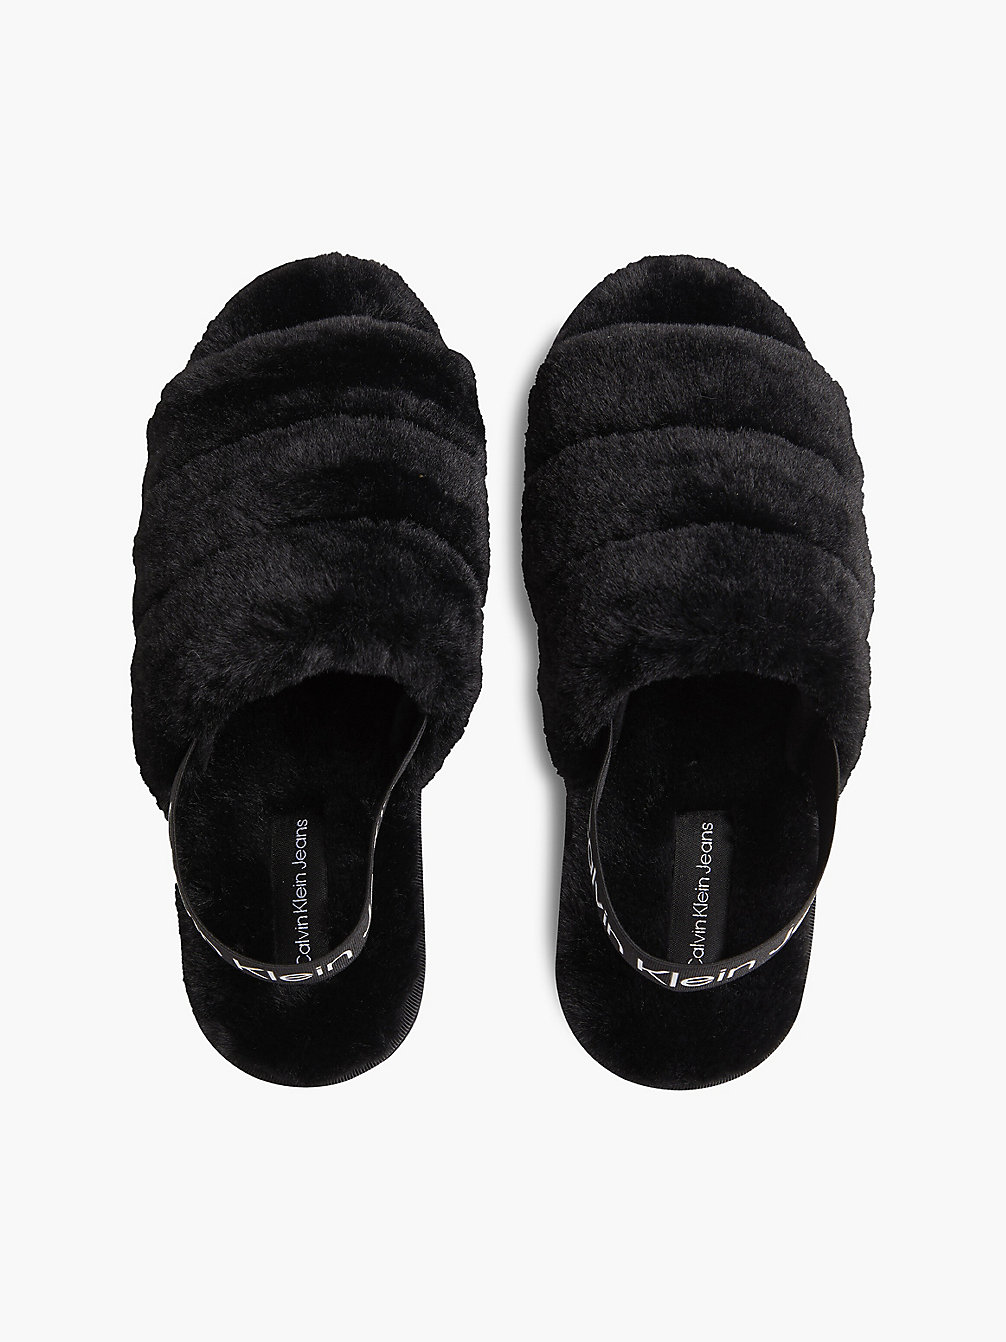 BLACK Recycled Faux Fur Slippers undefined women Calvin Klein